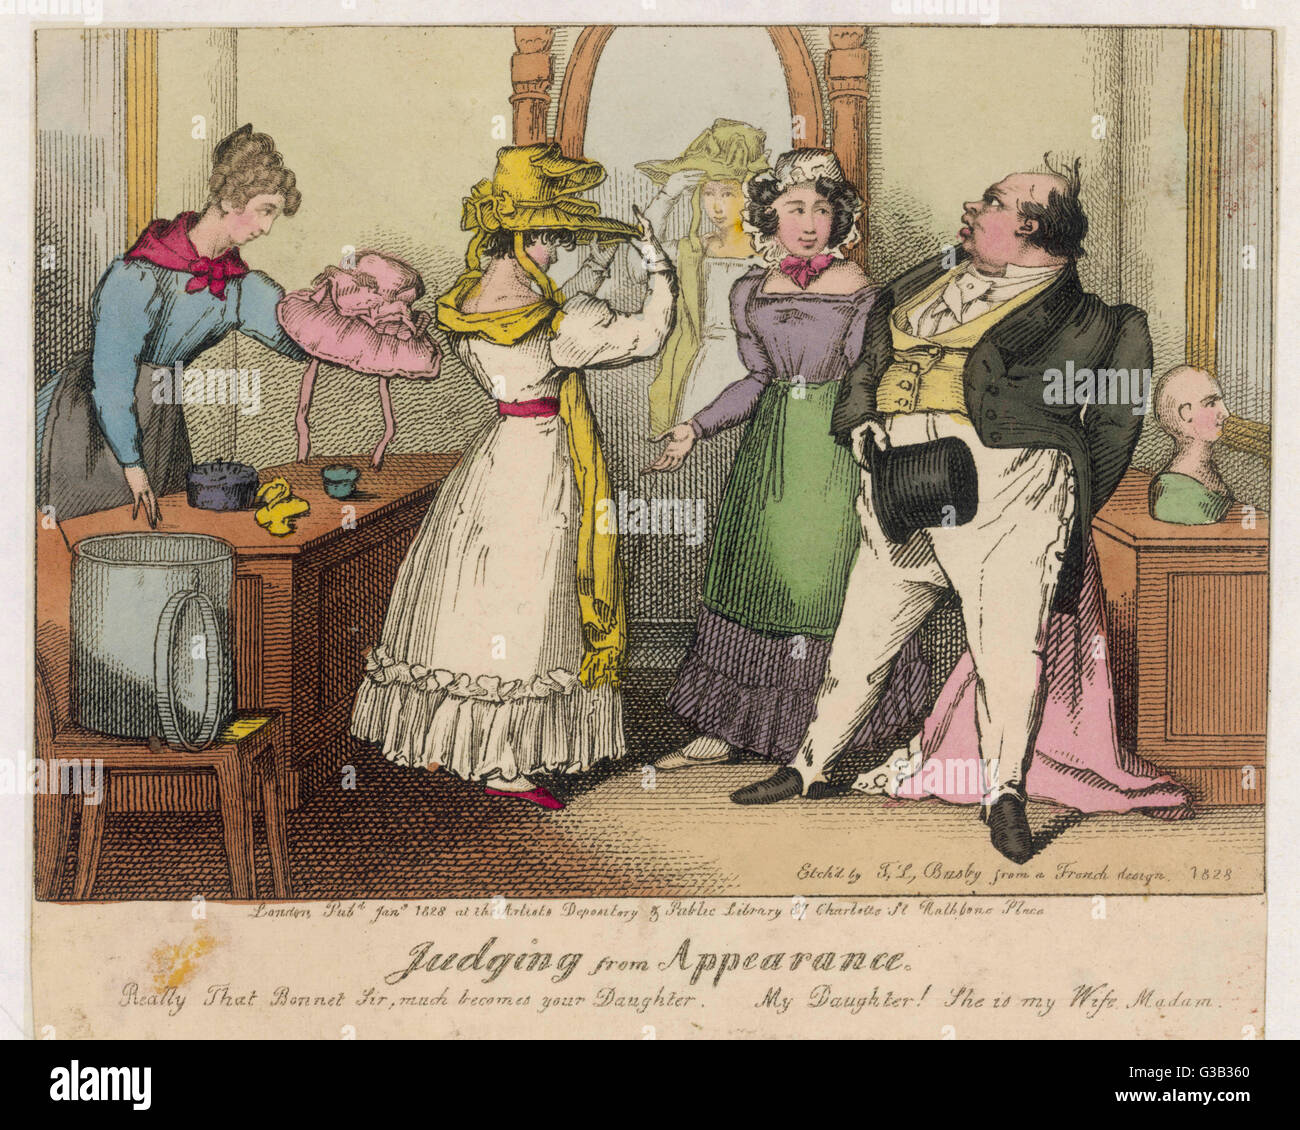 'Judging from Appearance', a  canny shop assistant infers  that a bonnet being tried on  by the wife takes years off  her age by mistaking her for  her husband's daughter.     Date: 1828 Stock Photo